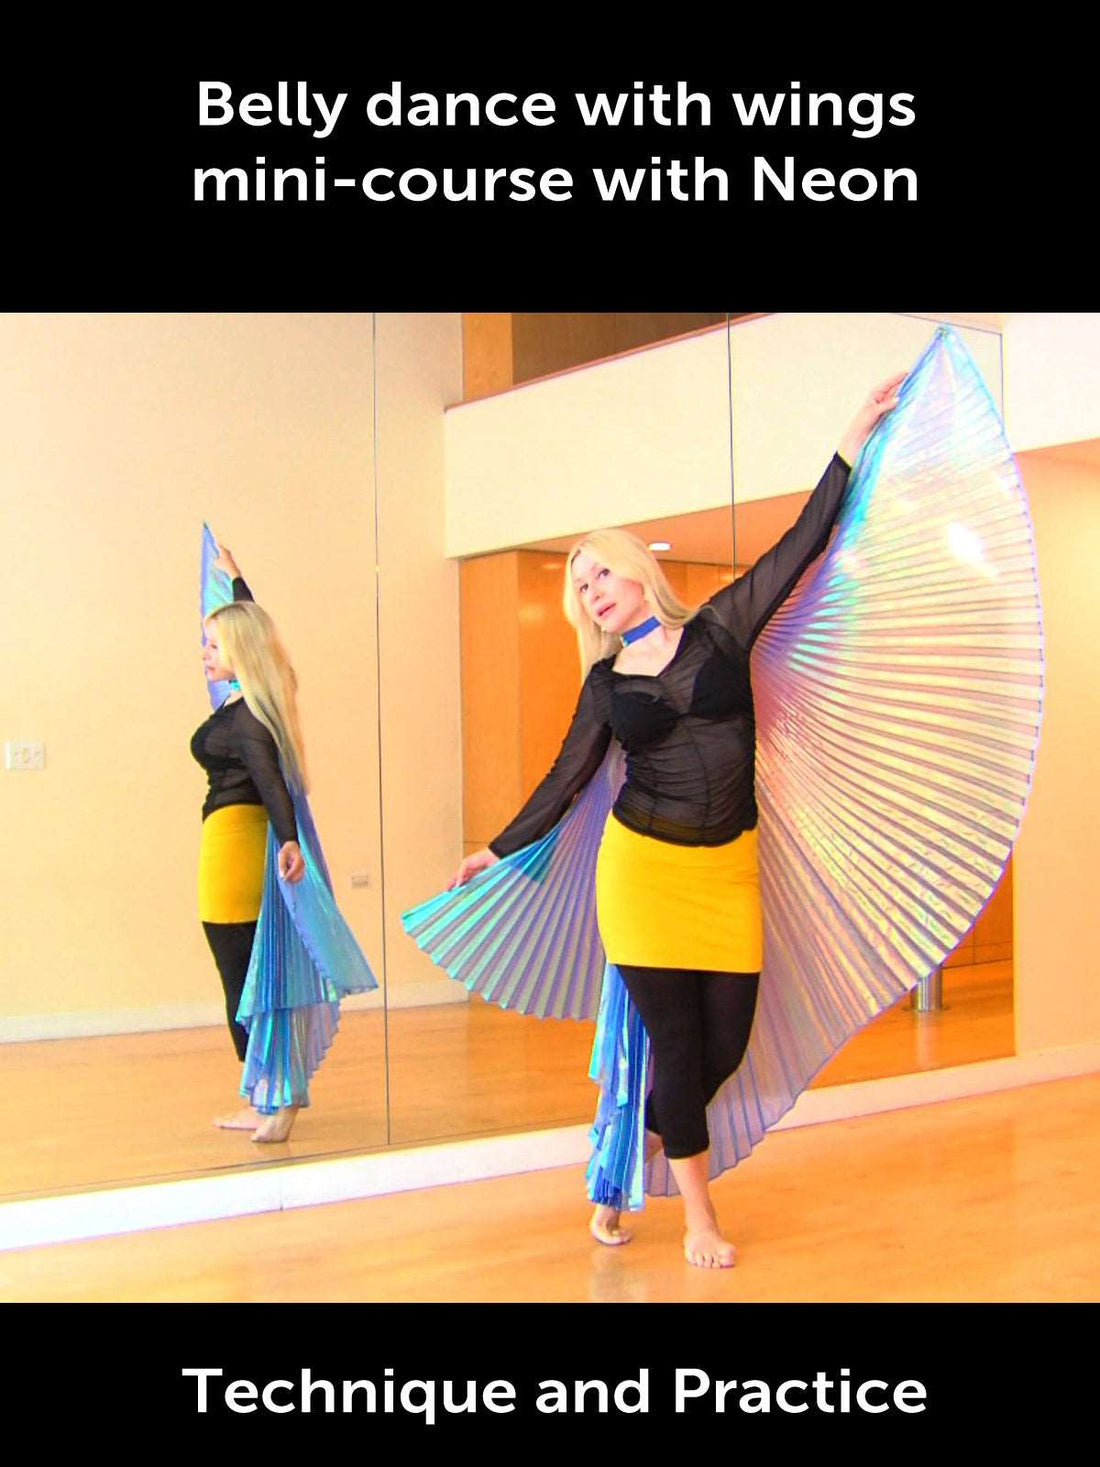 Belly Dance with Wings - Mini-Course with Neon (3 classes) - World Dance New York